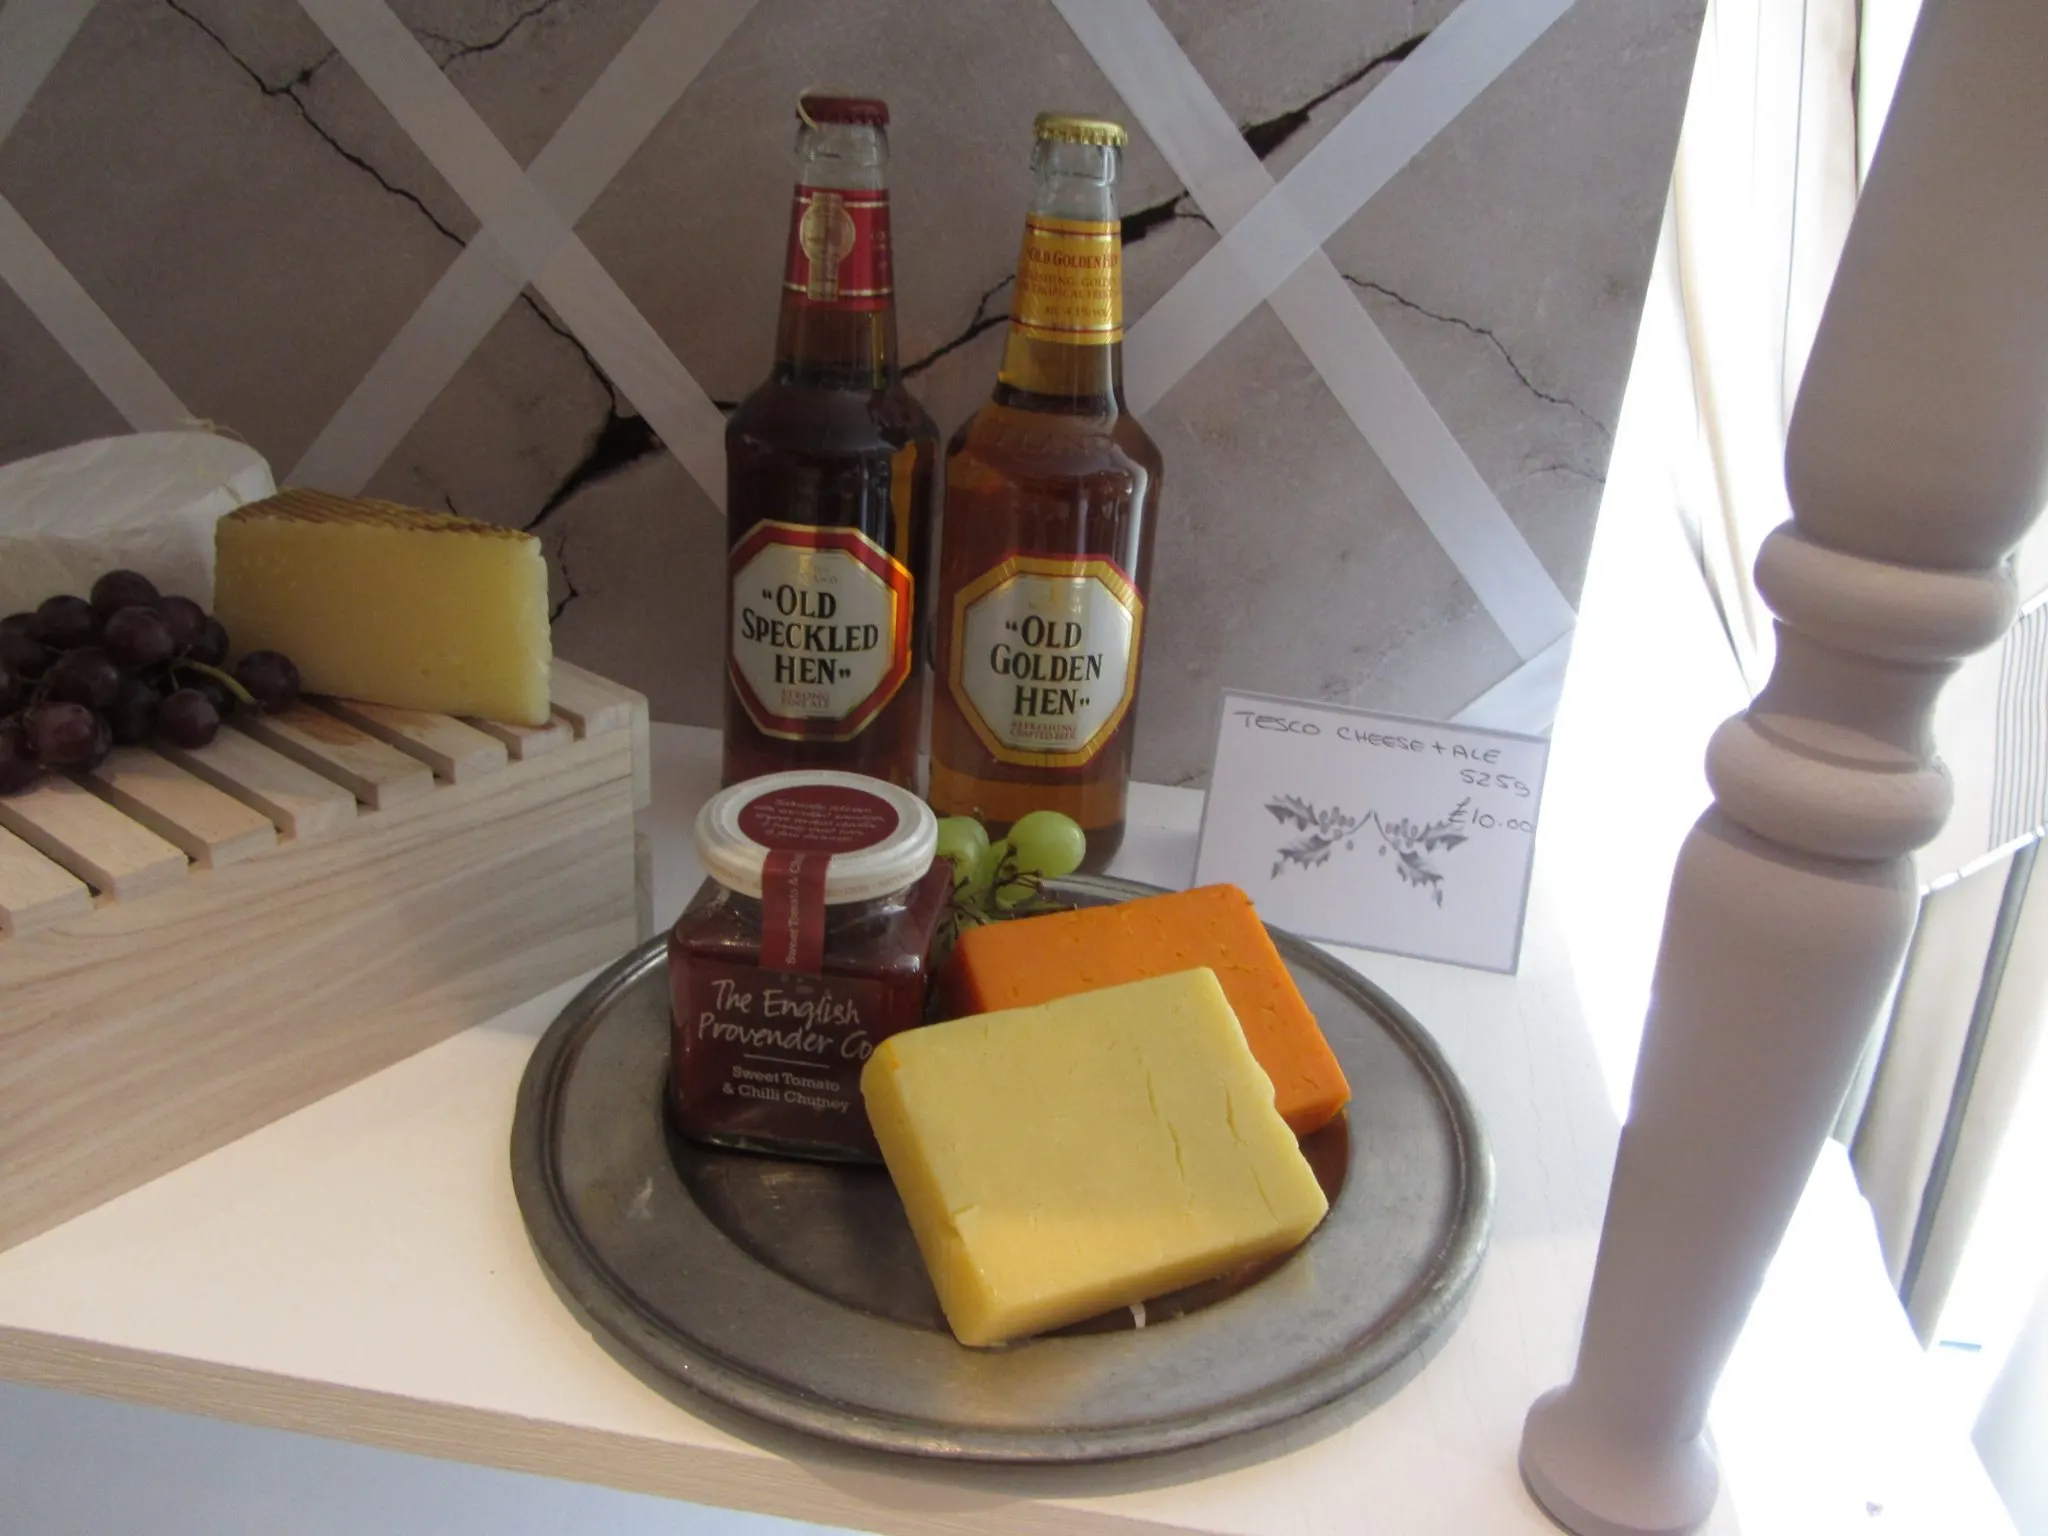 Xmas Gift Ideas for Men: Cheese and Ale